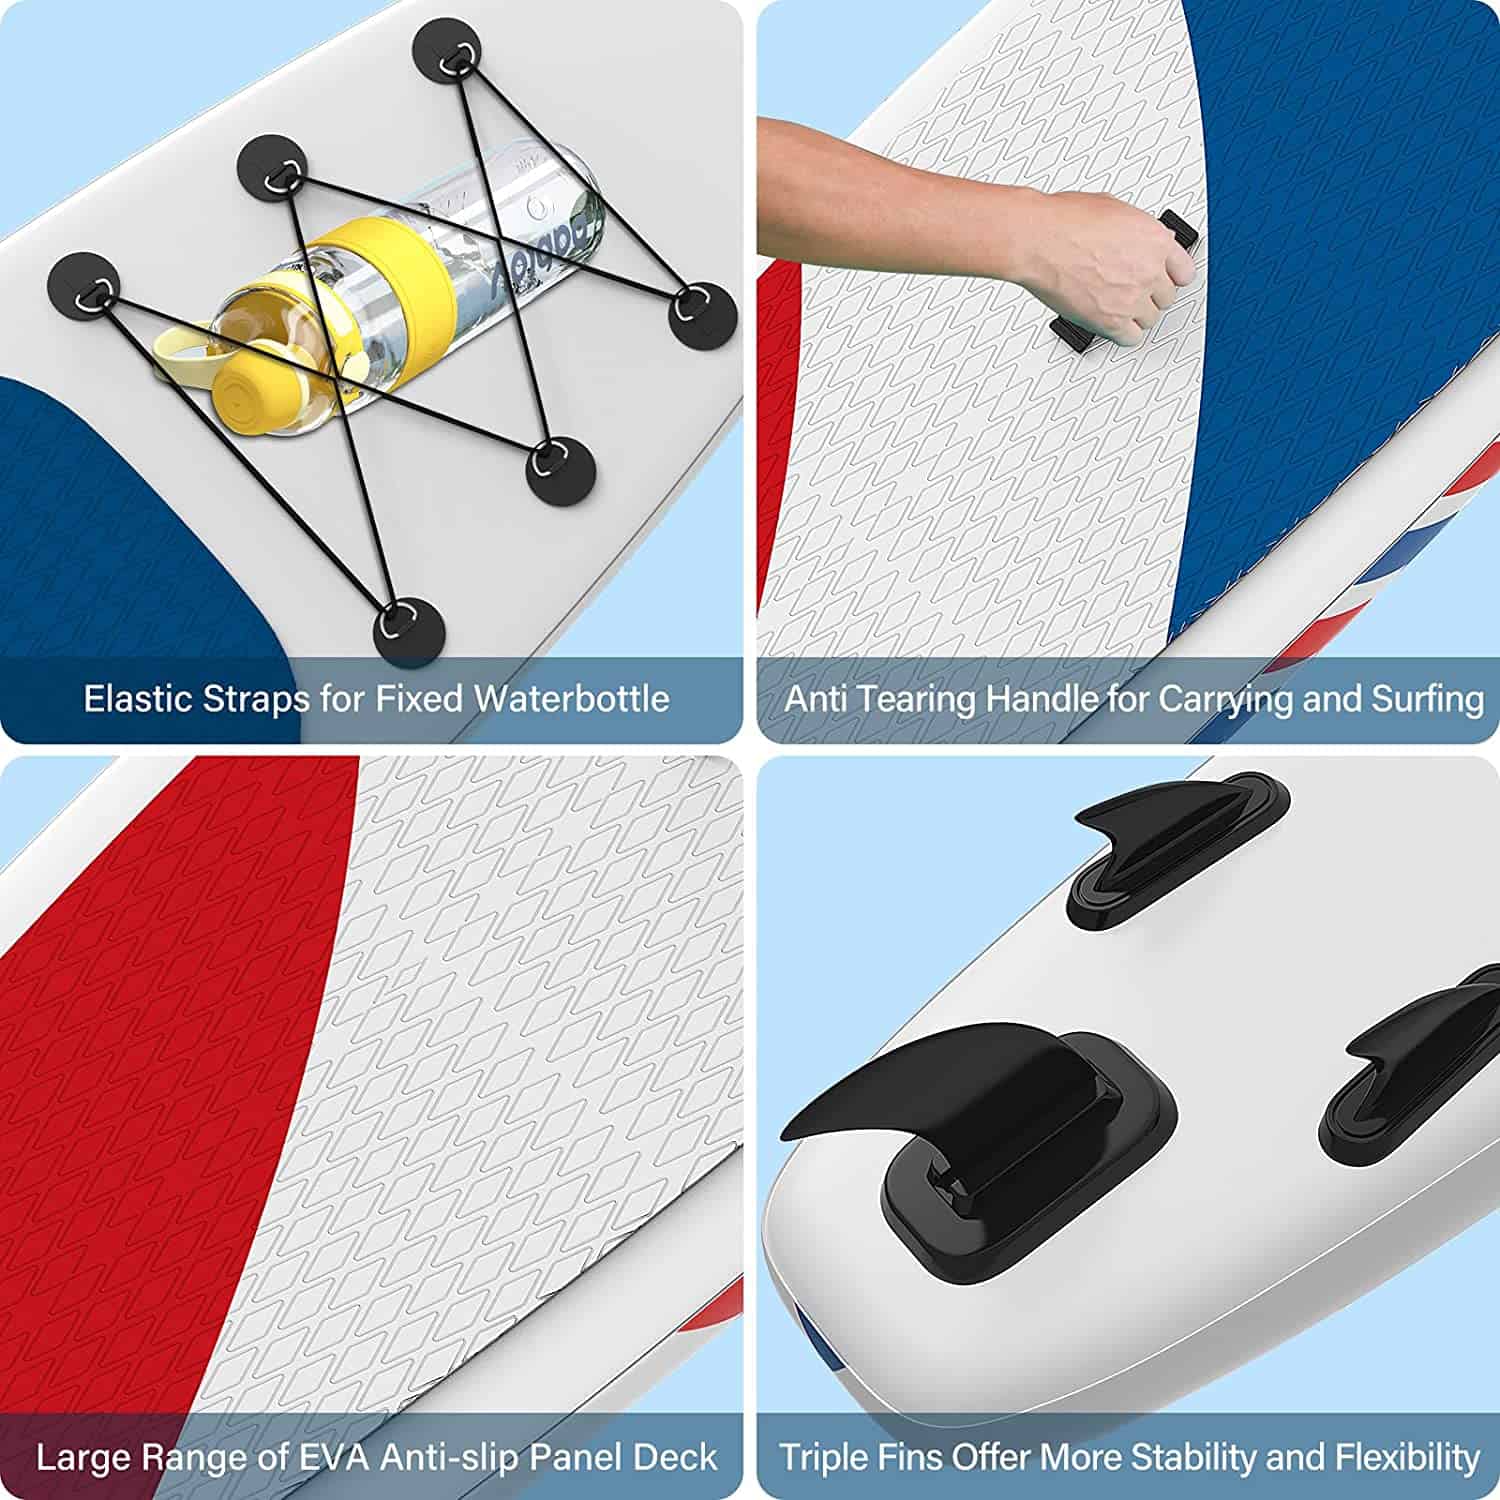 gruper_inflatable_stand_up_paddle_board_gruper_inflatable_st-1-1